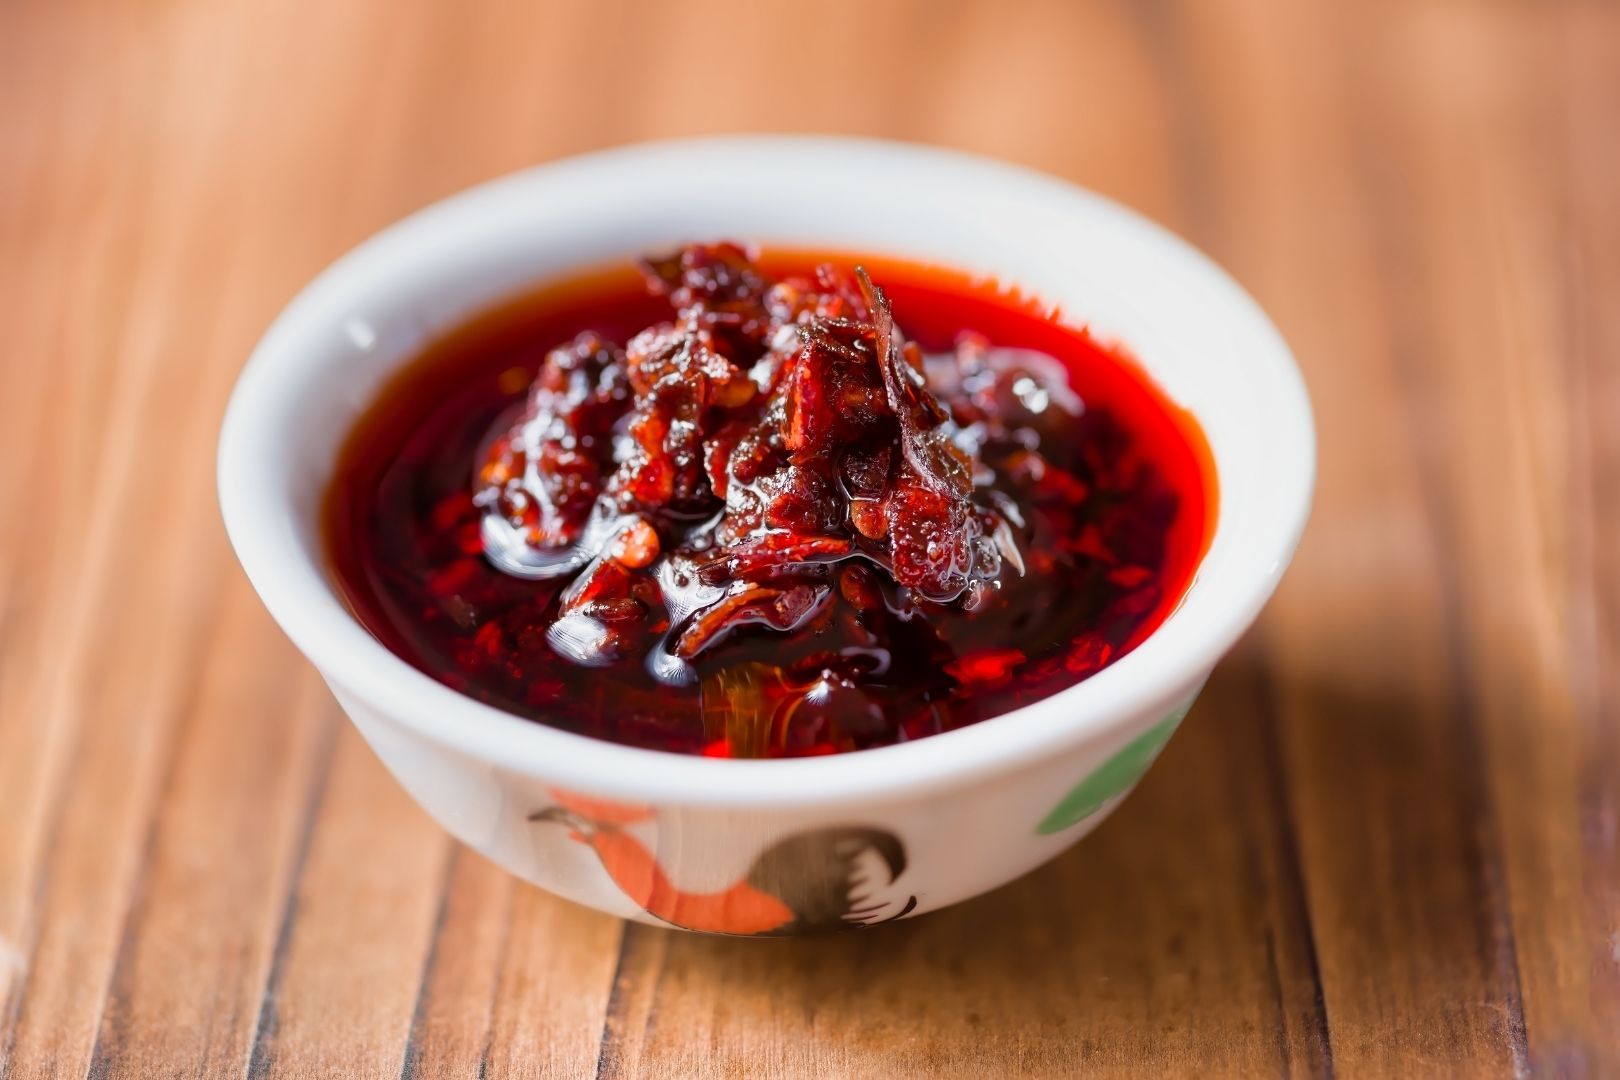 Spicy Japanese condiments: A small white dish with an orange and brown rooster on the front filled with deep red rayu oil. Lots of chopped red chilis can be seen in the oil and are piled up in the center making a peak above the oil. The bowl sits on a natural wooden tabletop.